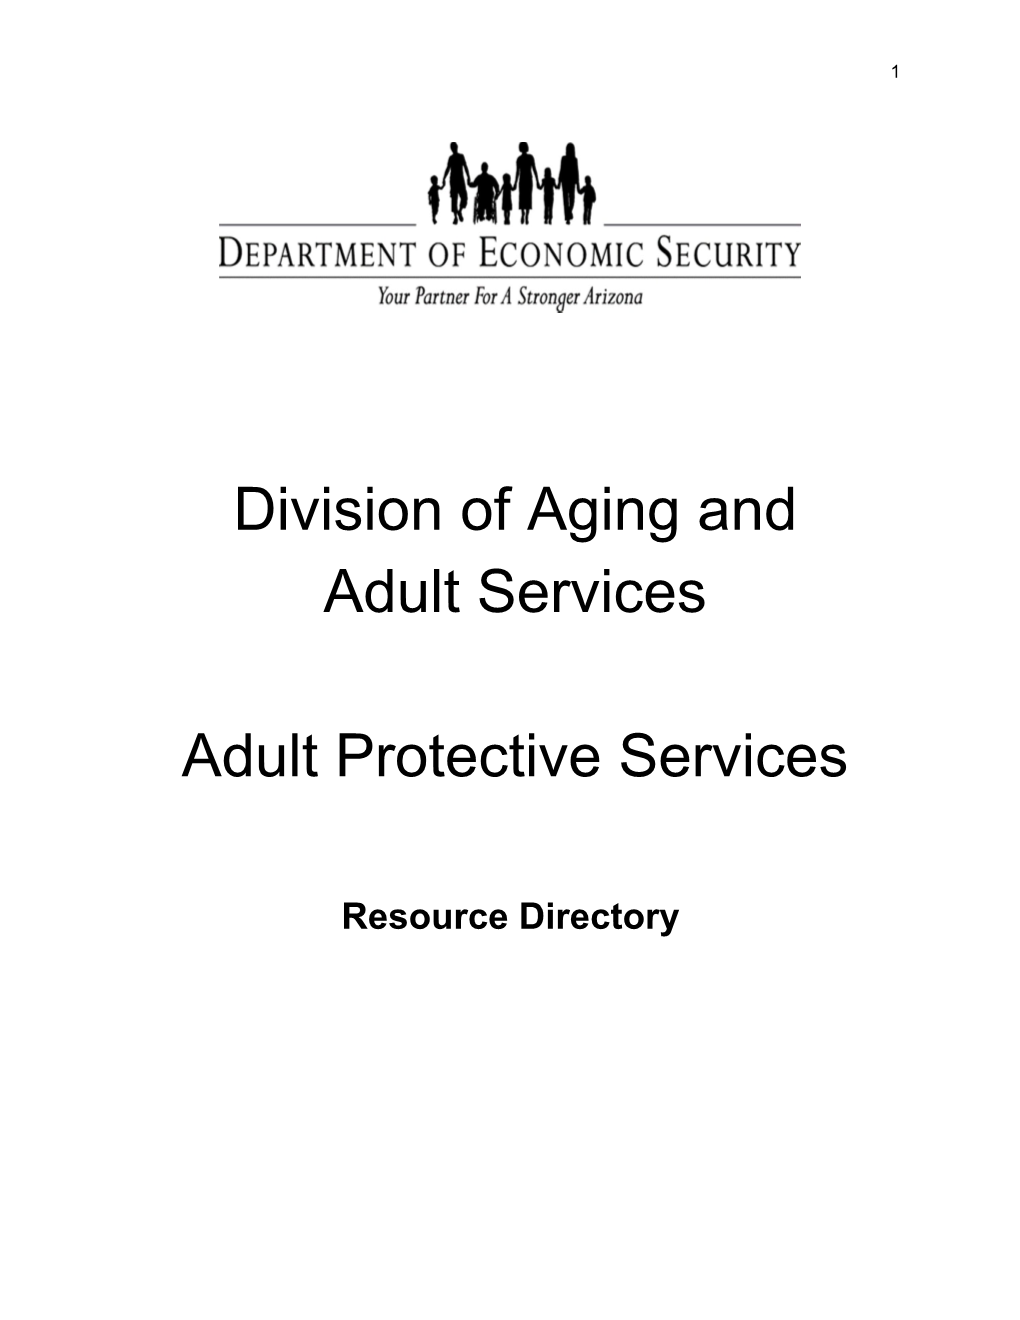 Adult Protective Services Resource Directory